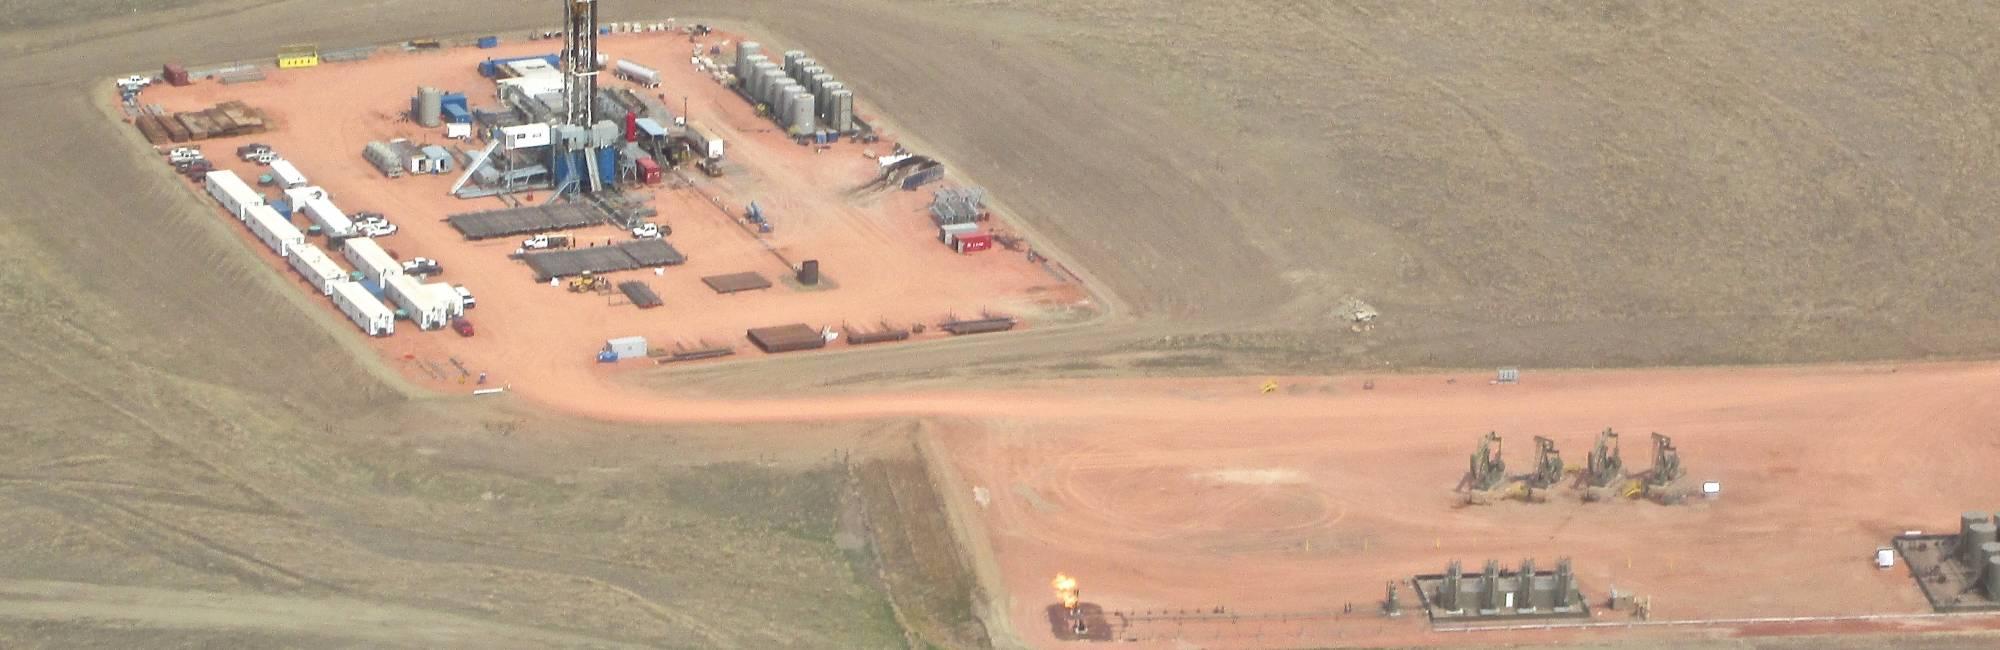 drill rig and tons of equipment on the ground in north dakota